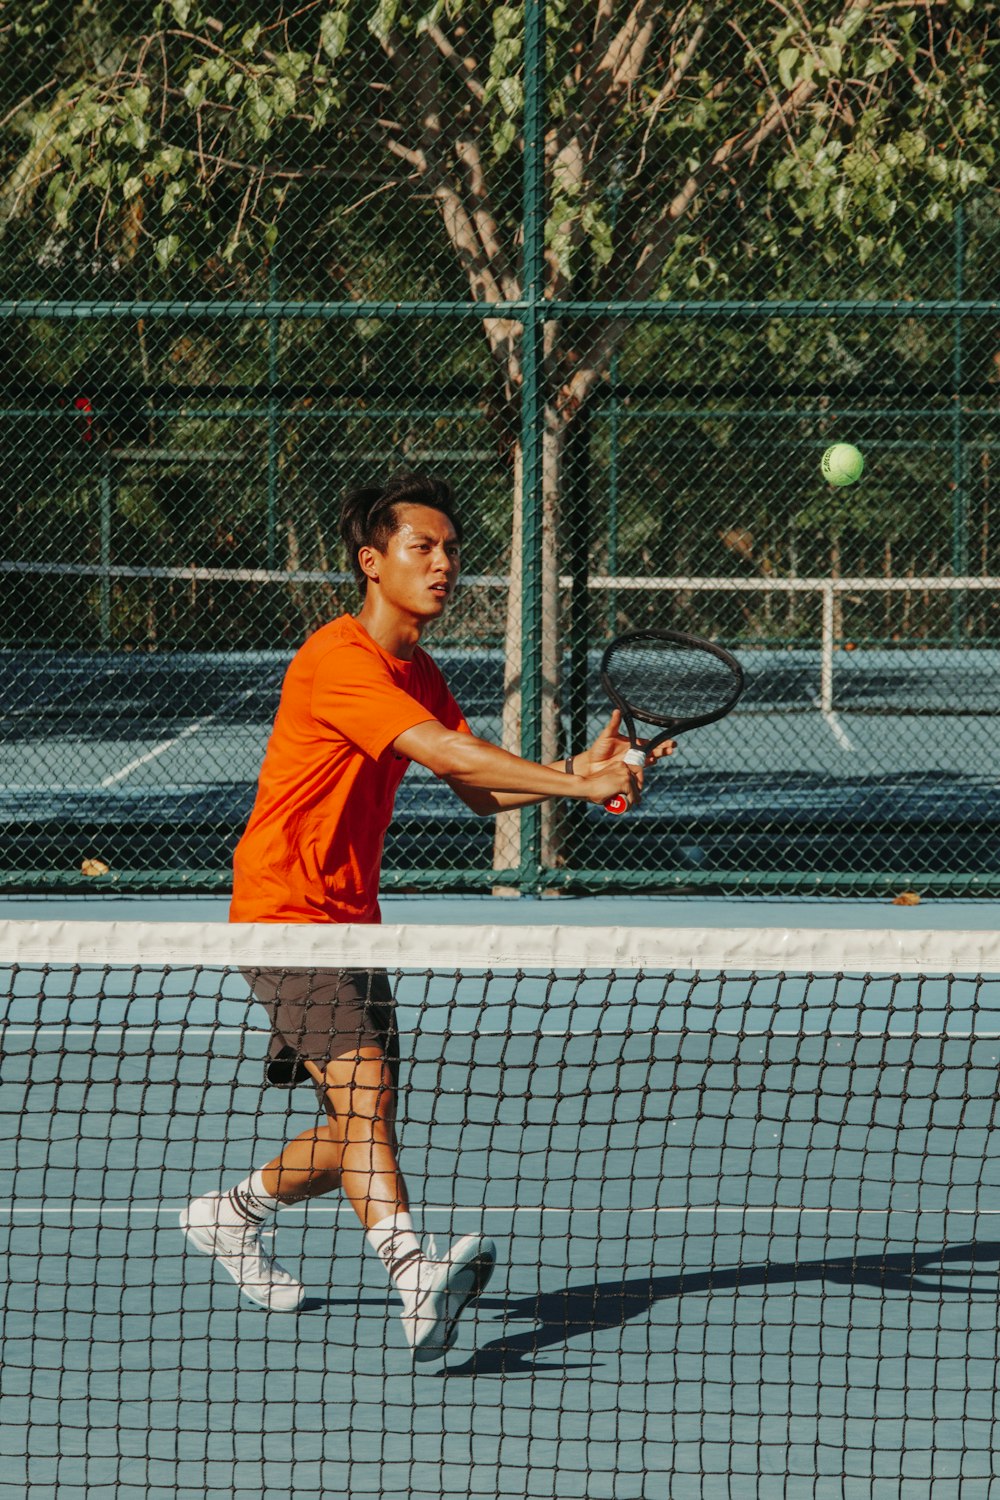 a man is swinging a tennis racket at a ball